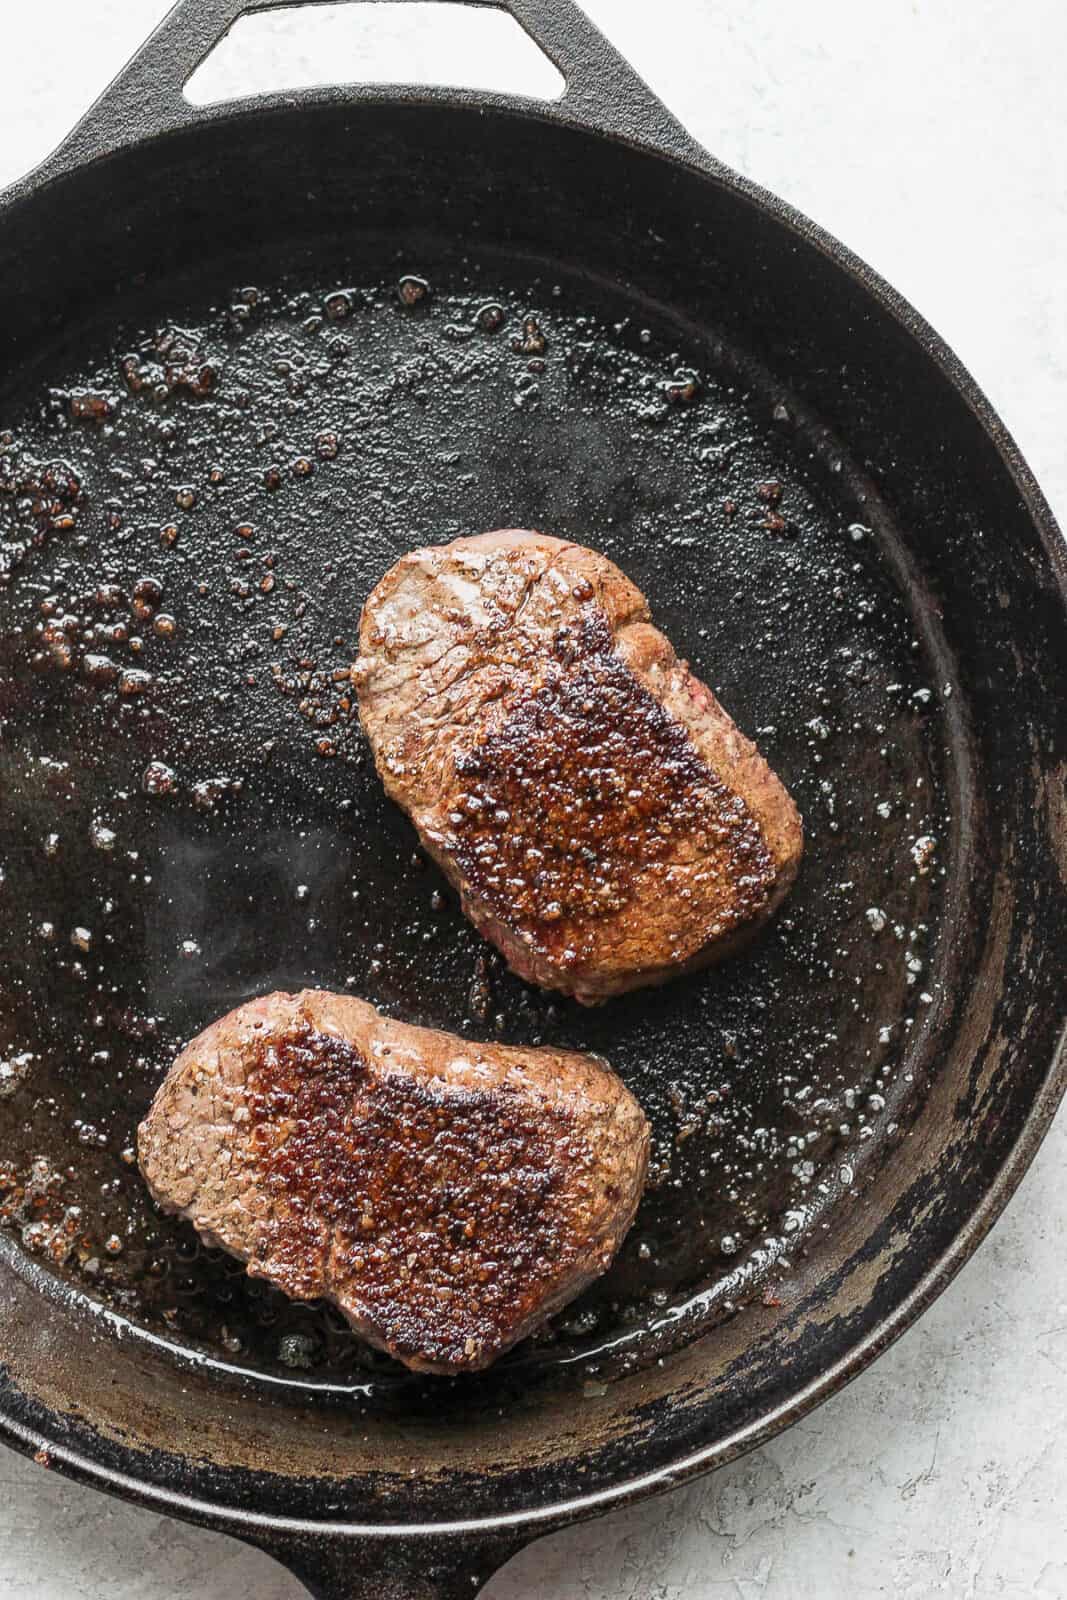 Two sirloin steaks in a cast iron skillet.